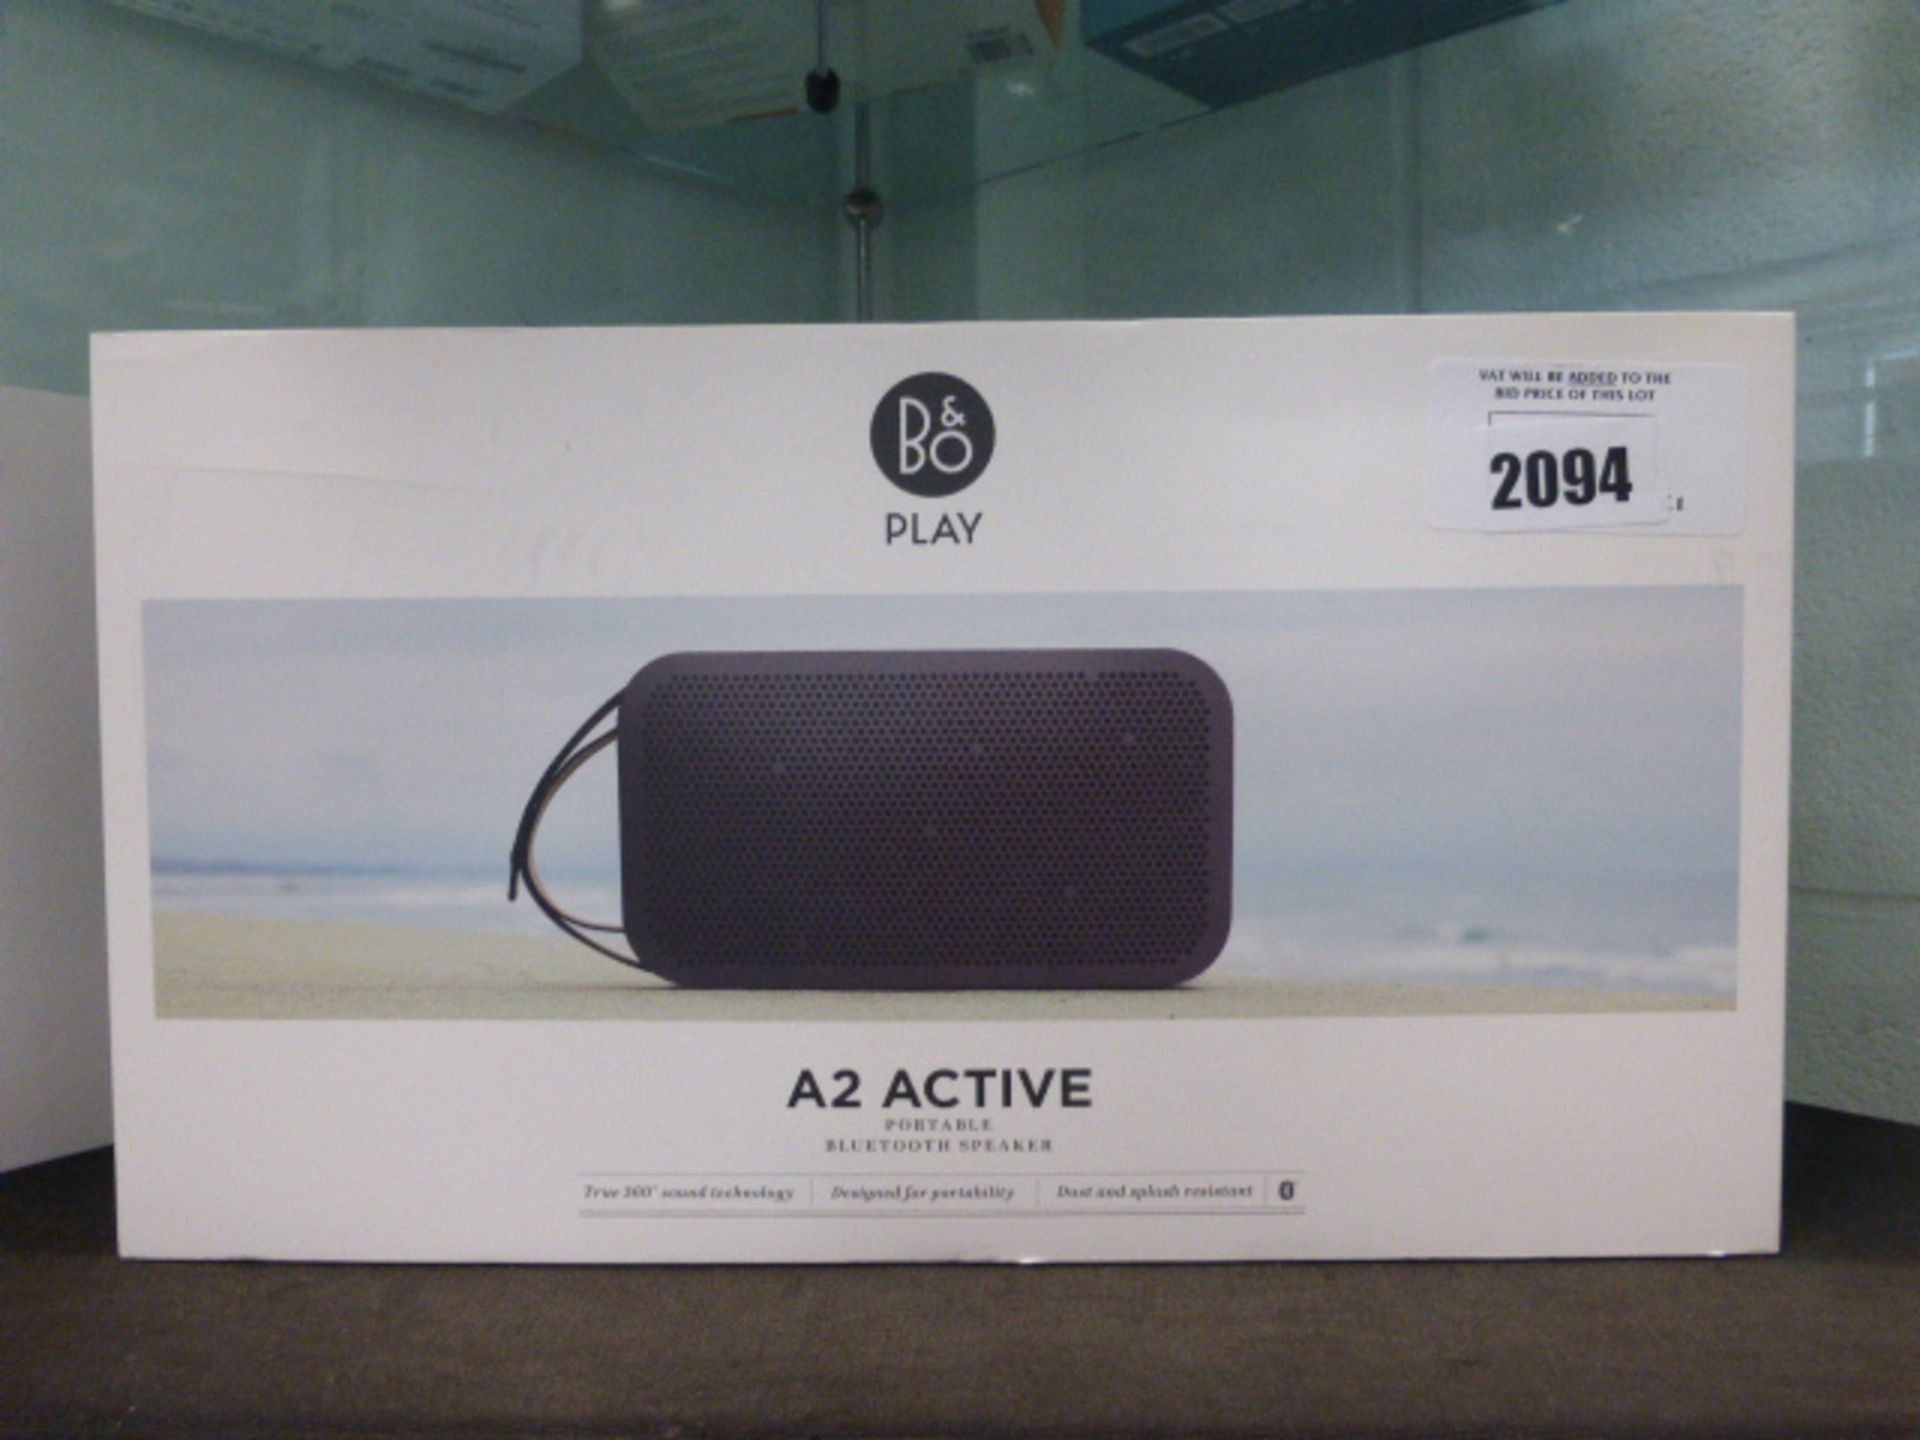 Bang & Olufsen portable bluetooth speaker model A2 Active in box - Image 2 of 2